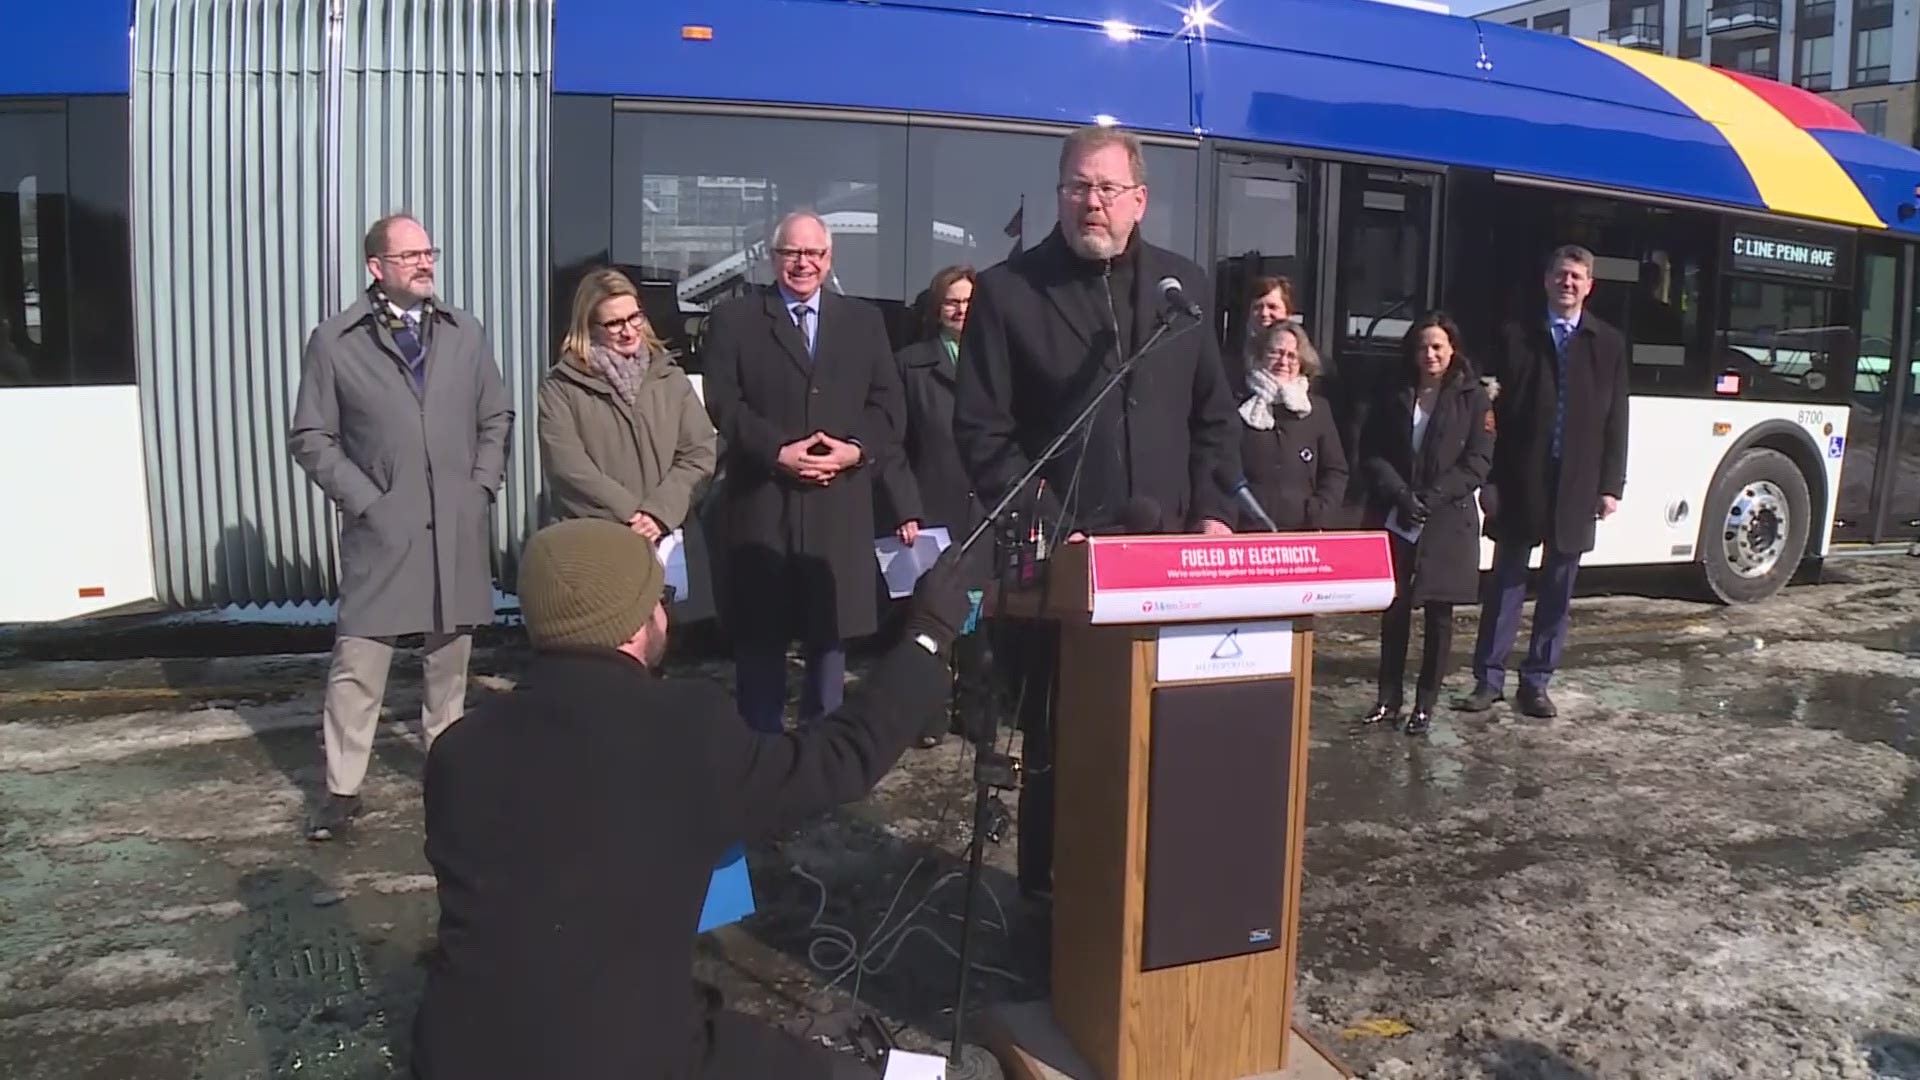 Metro Transit officially welcomed its first fully electric bus Thursday, made by New Flyer America in St. Cloud. It will run on the new Bus Rapid Transit route known as the C Line starting in June. Gov. Walz was on hand for the dedication, and pointed out his proposed budget calls for 10 new BRT lines to be added in the next decade.